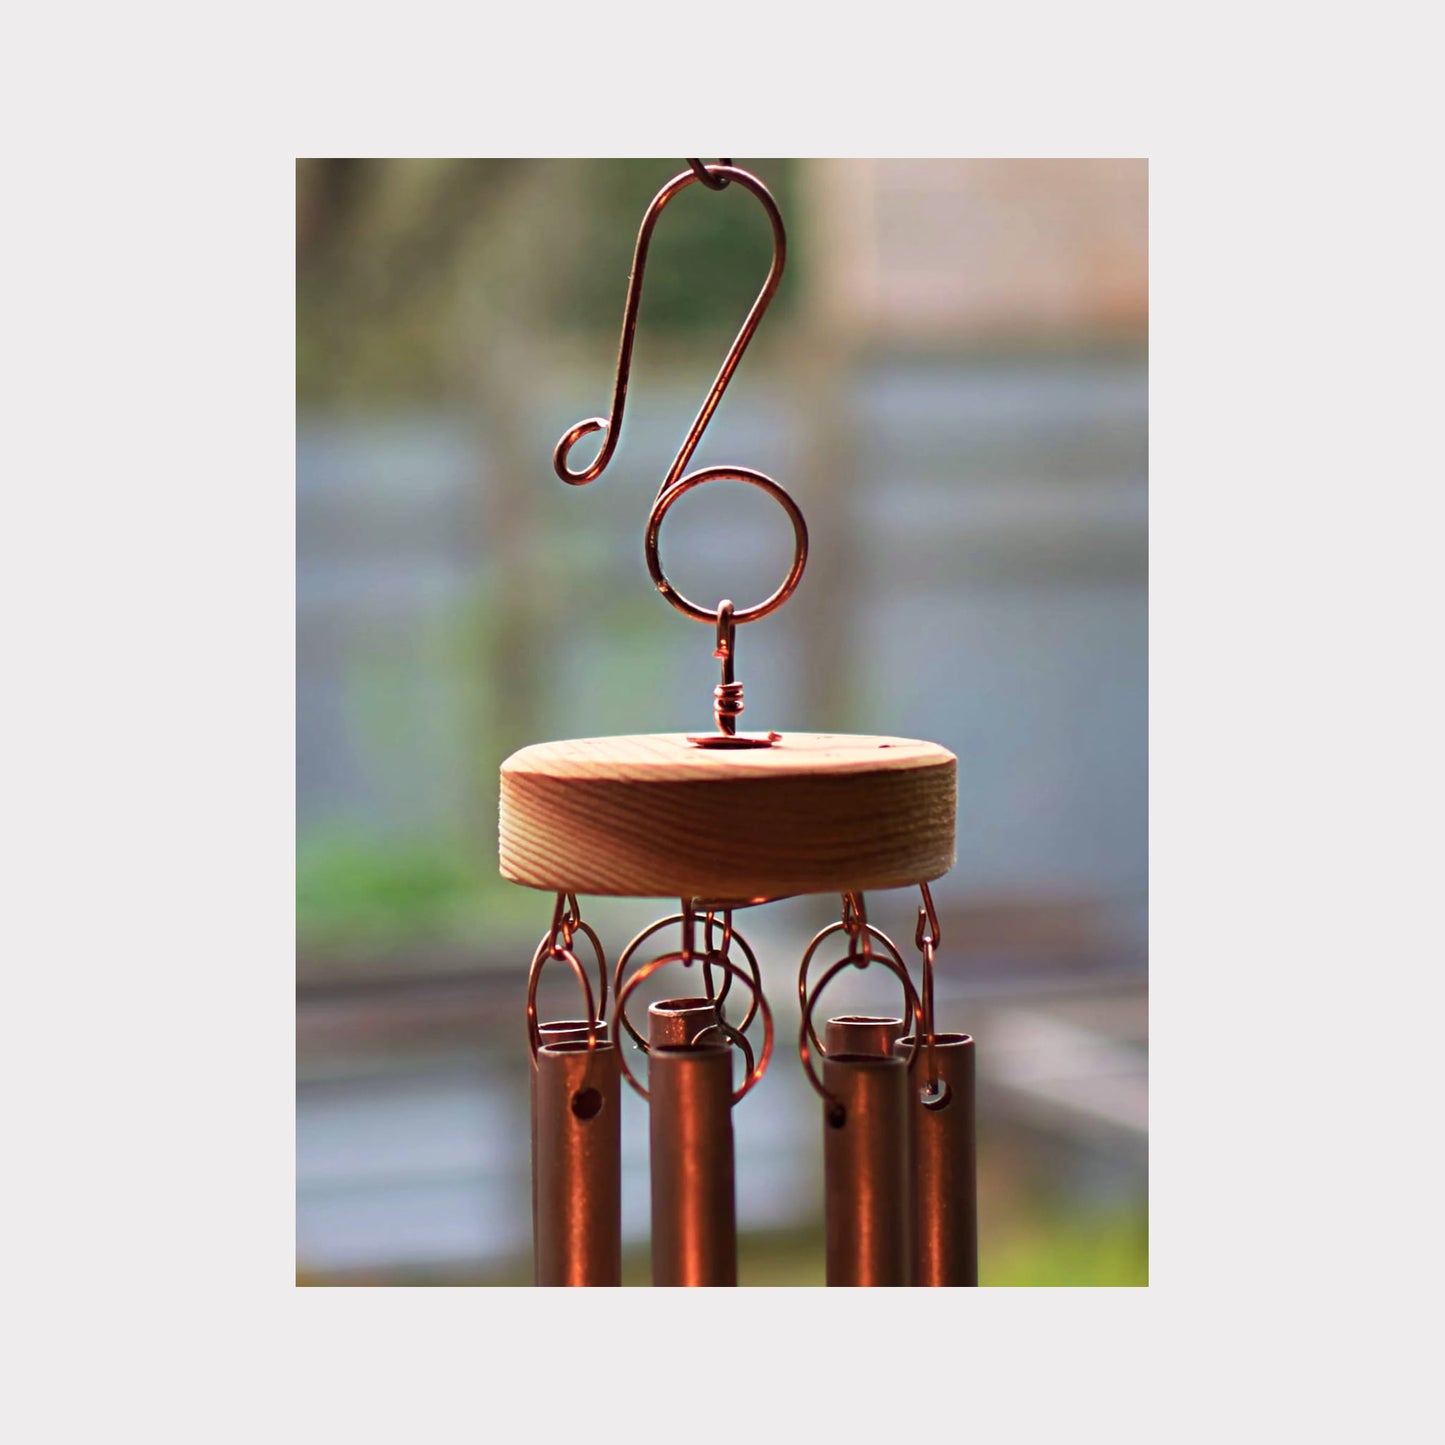 top of a handcrafted copper wind chime showing handmade hardware